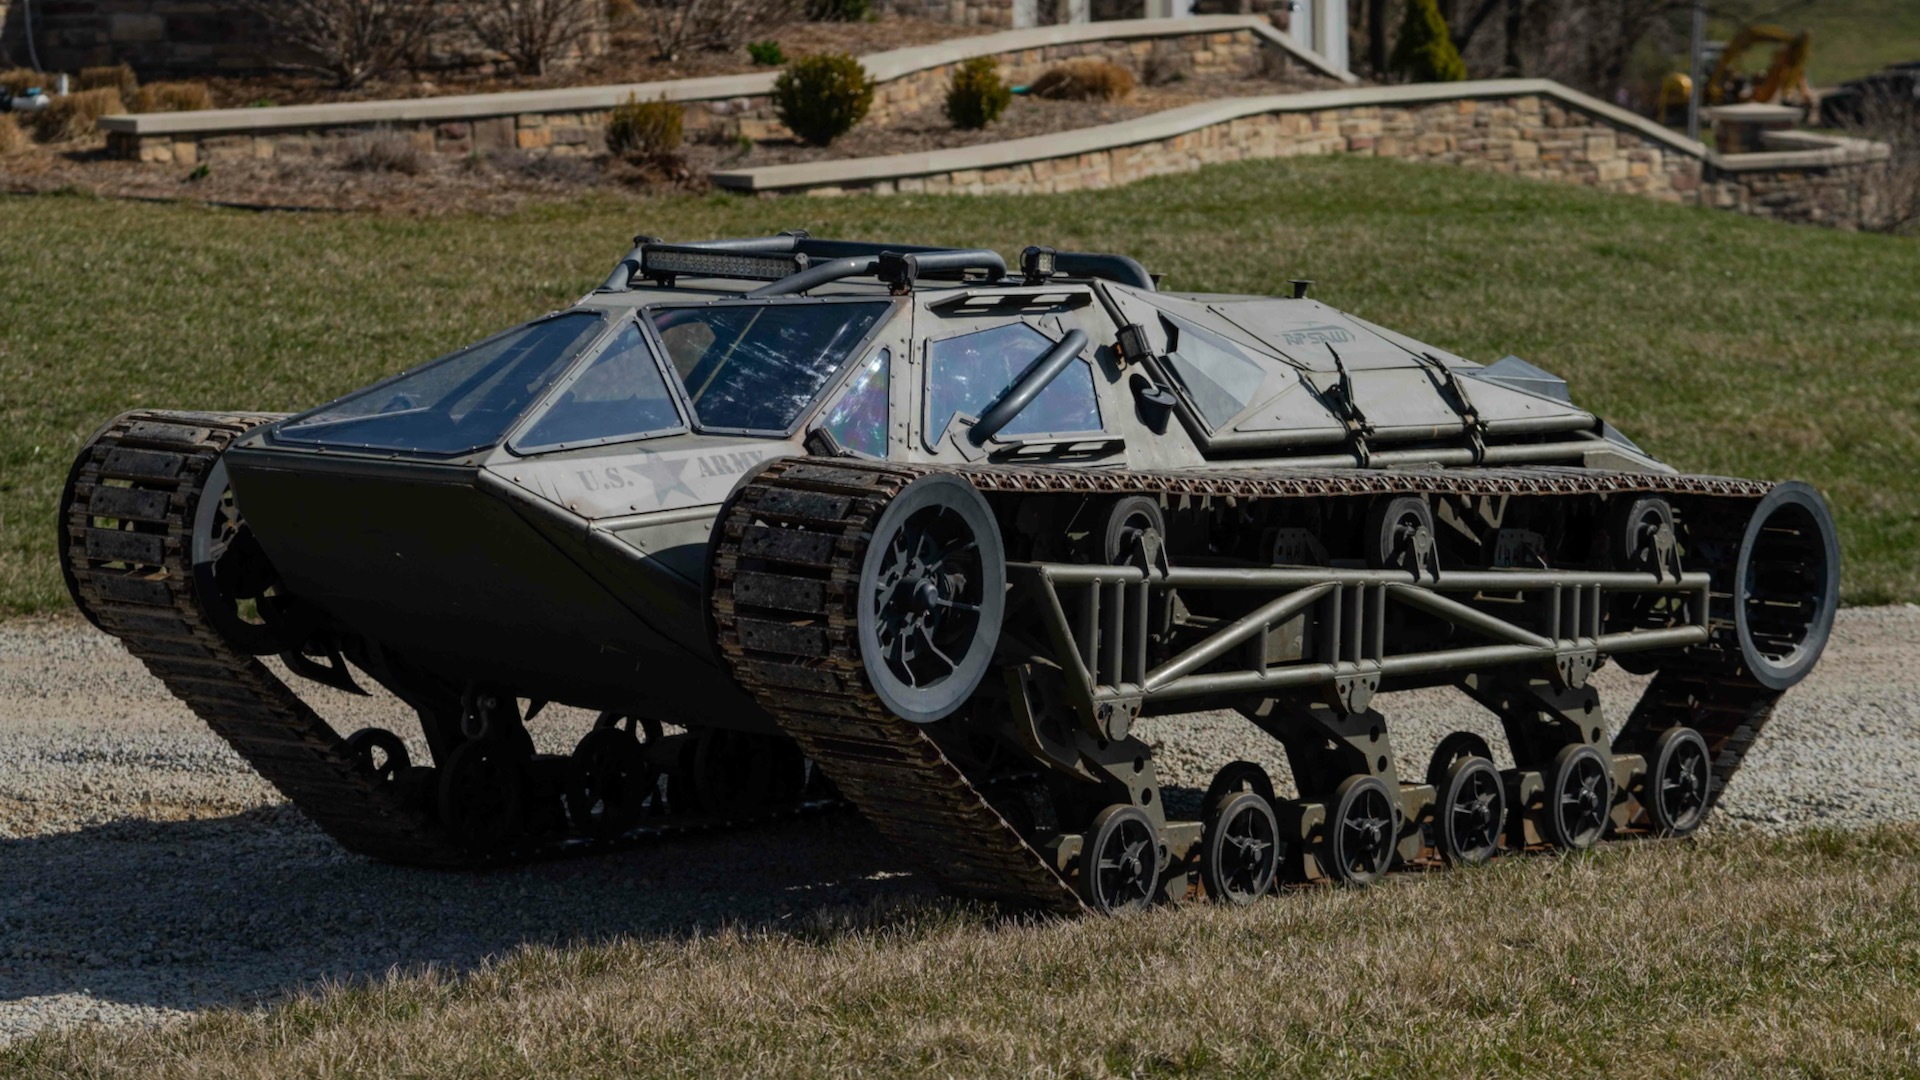 2009 Ripsaw from "The Fate of the Furious" (photo via Mecum Auctions)